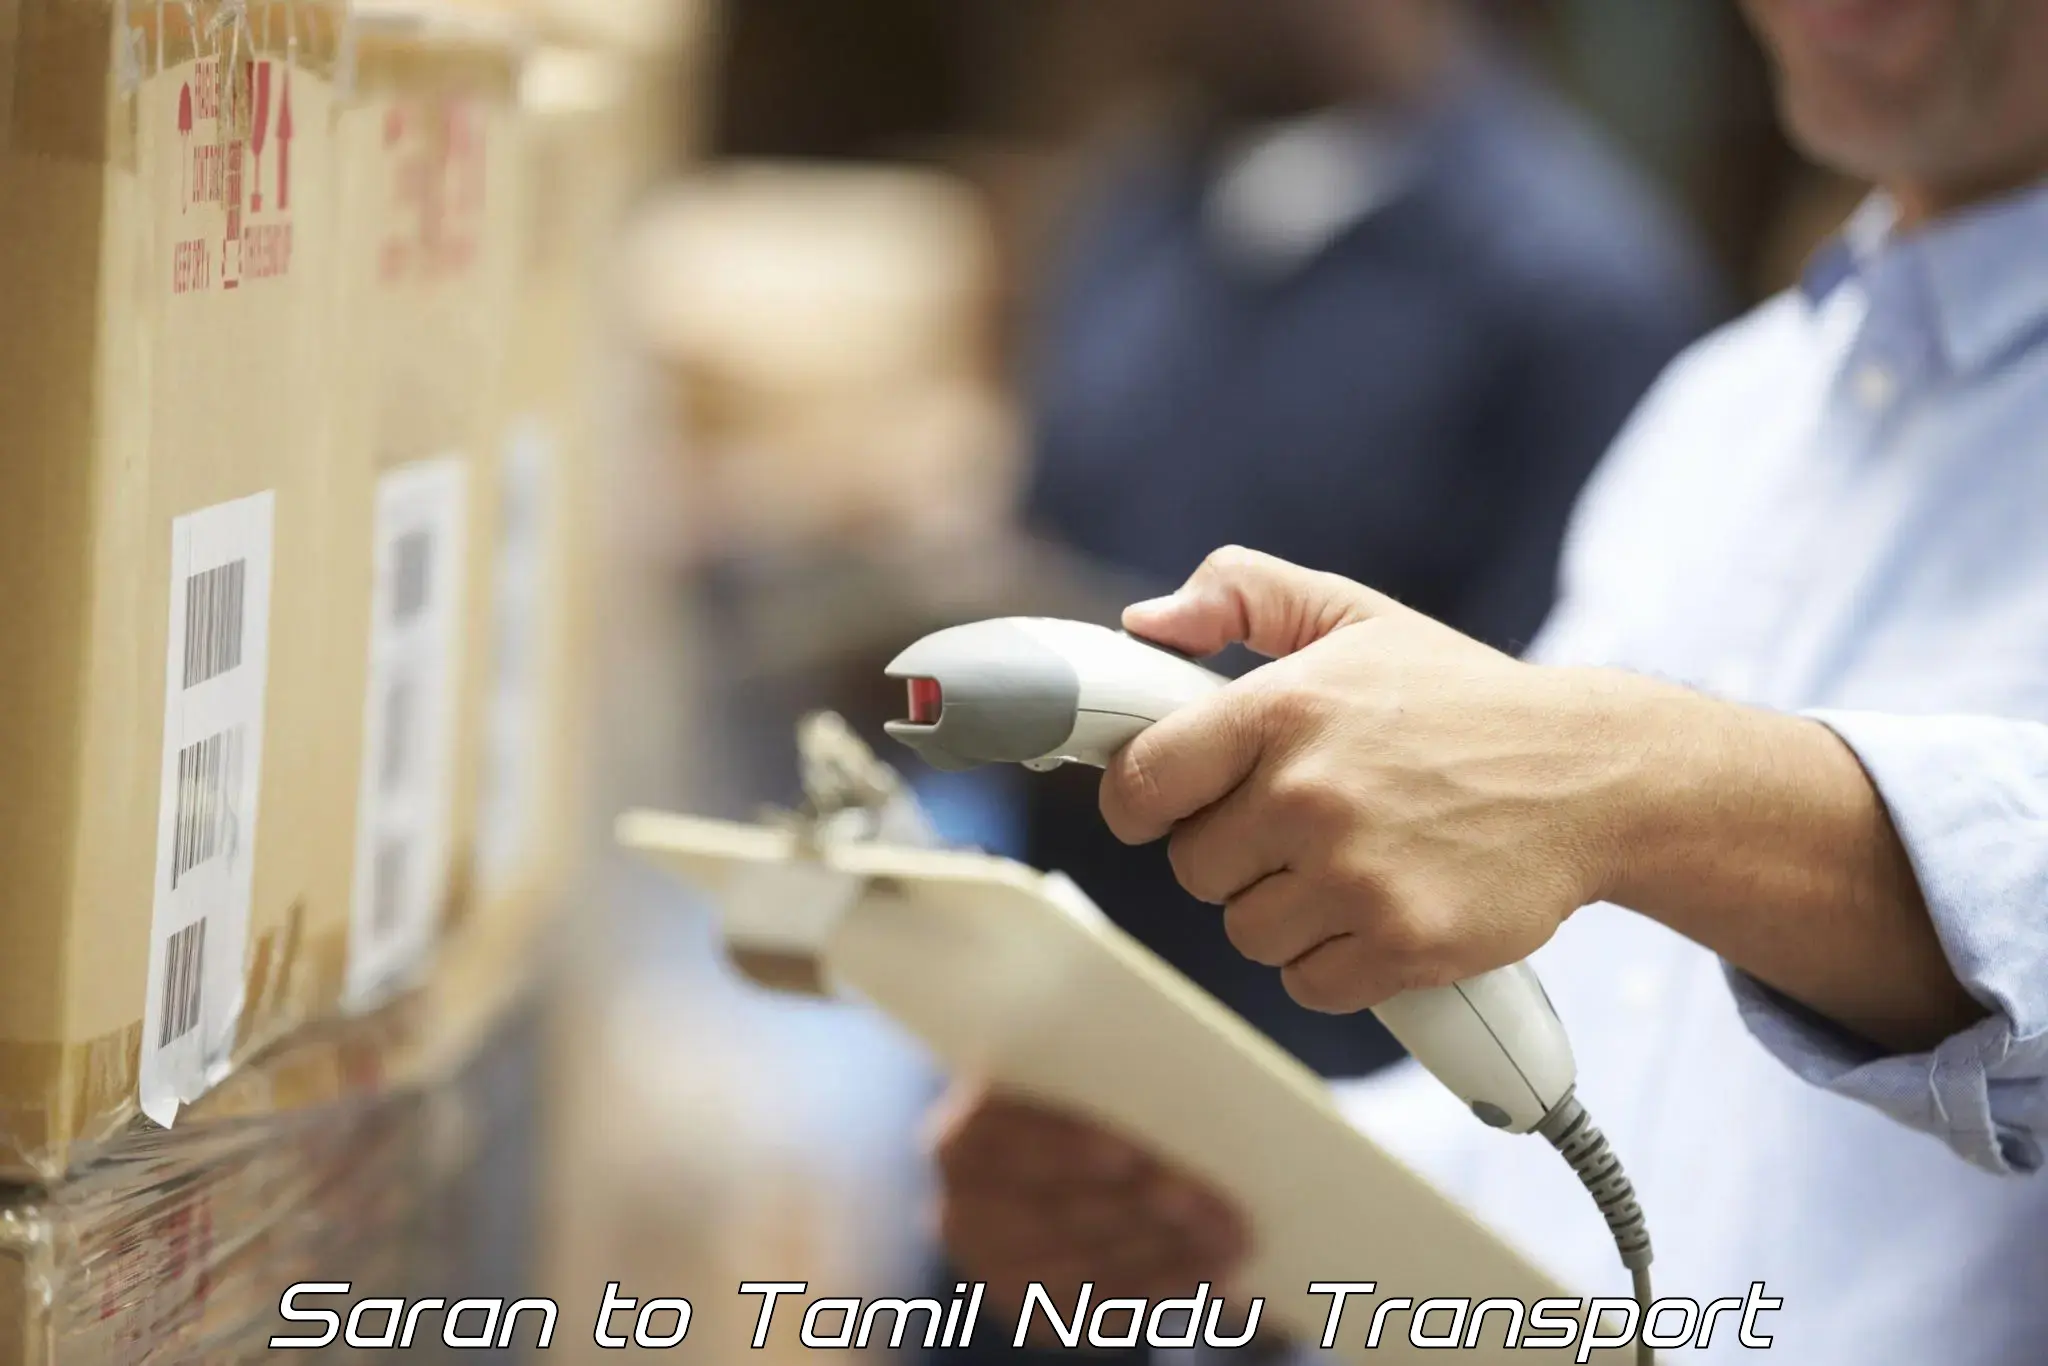 Road transport online services Saran to Coimbatore